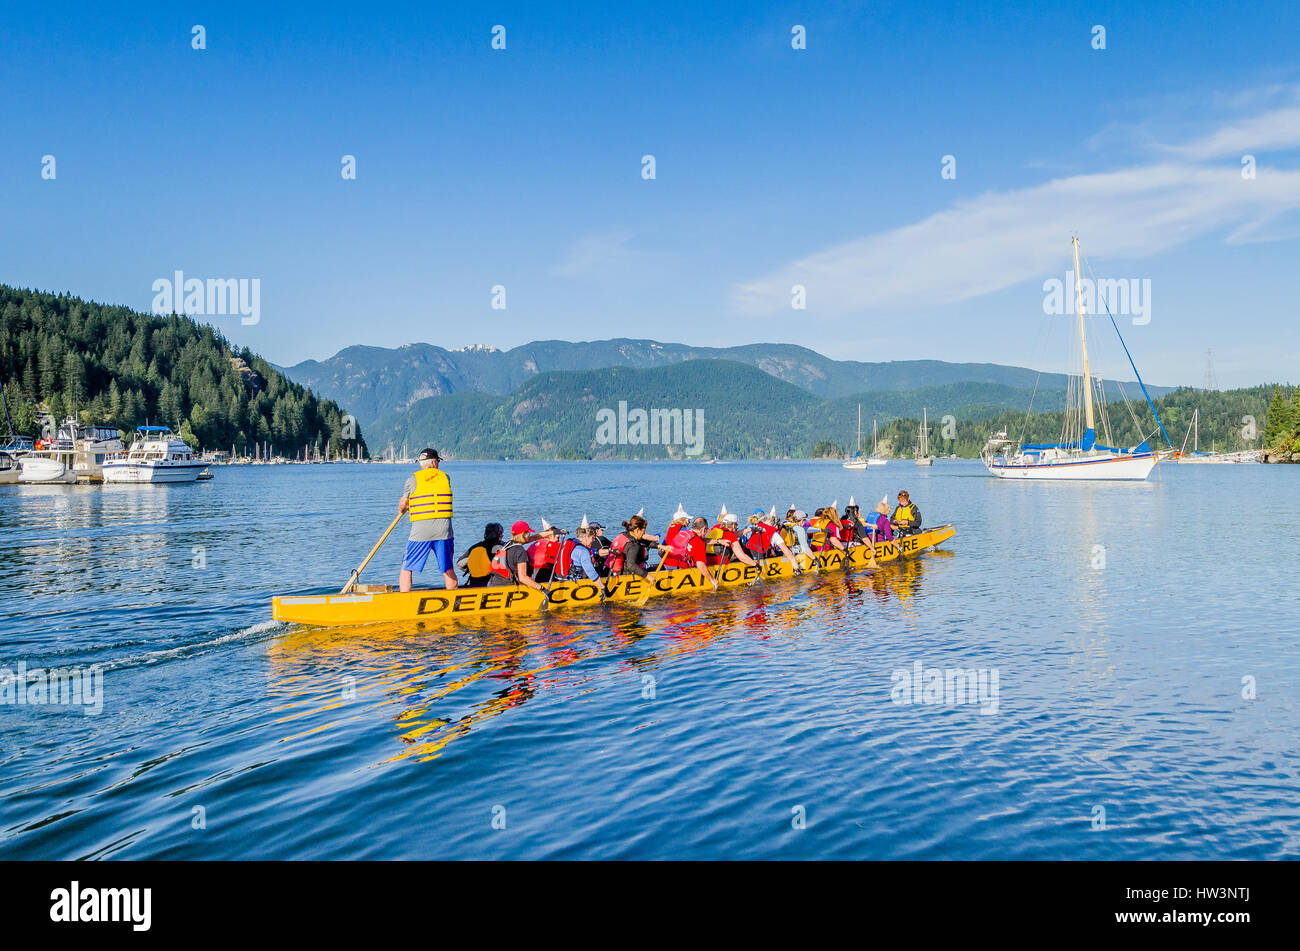 Dragon boat team, Deep Cove, District of N. Vancouver, British Columbia, Canada Stock Photo